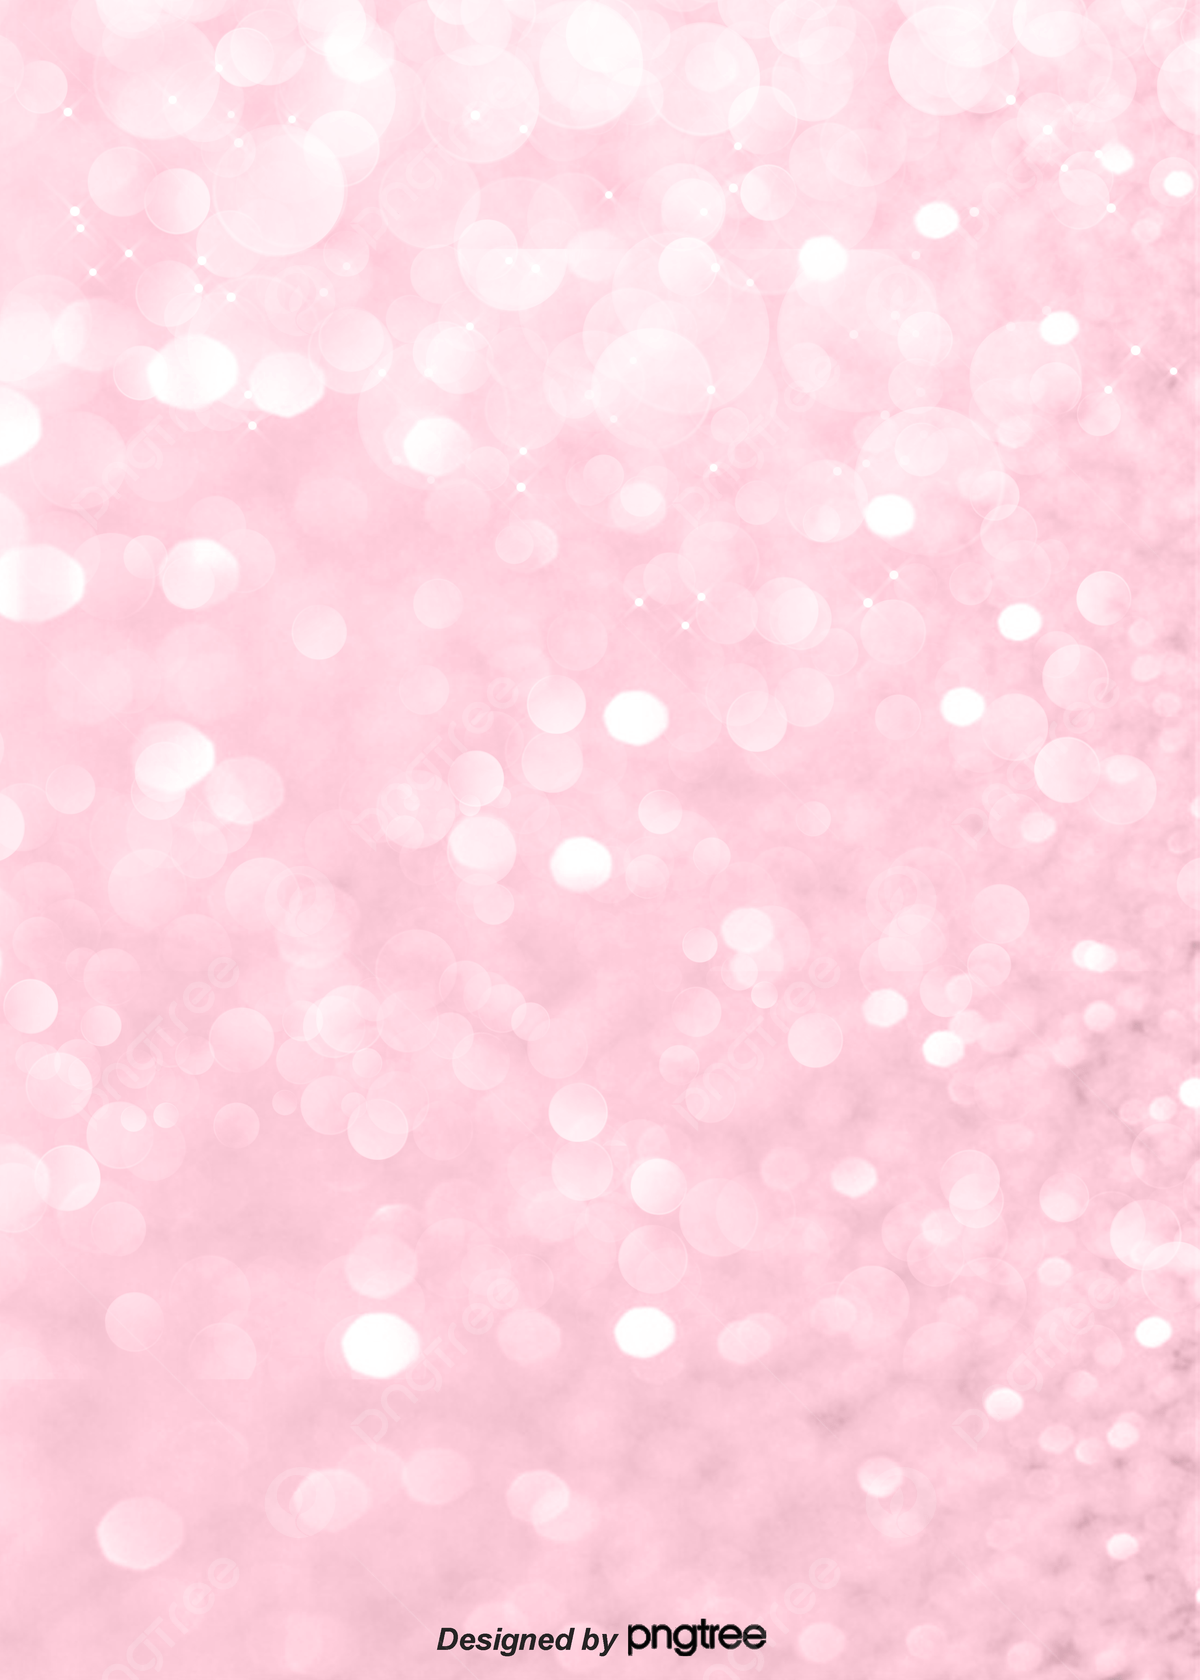 A pink bokeh background with a white border - Light pink, hot pink, pink